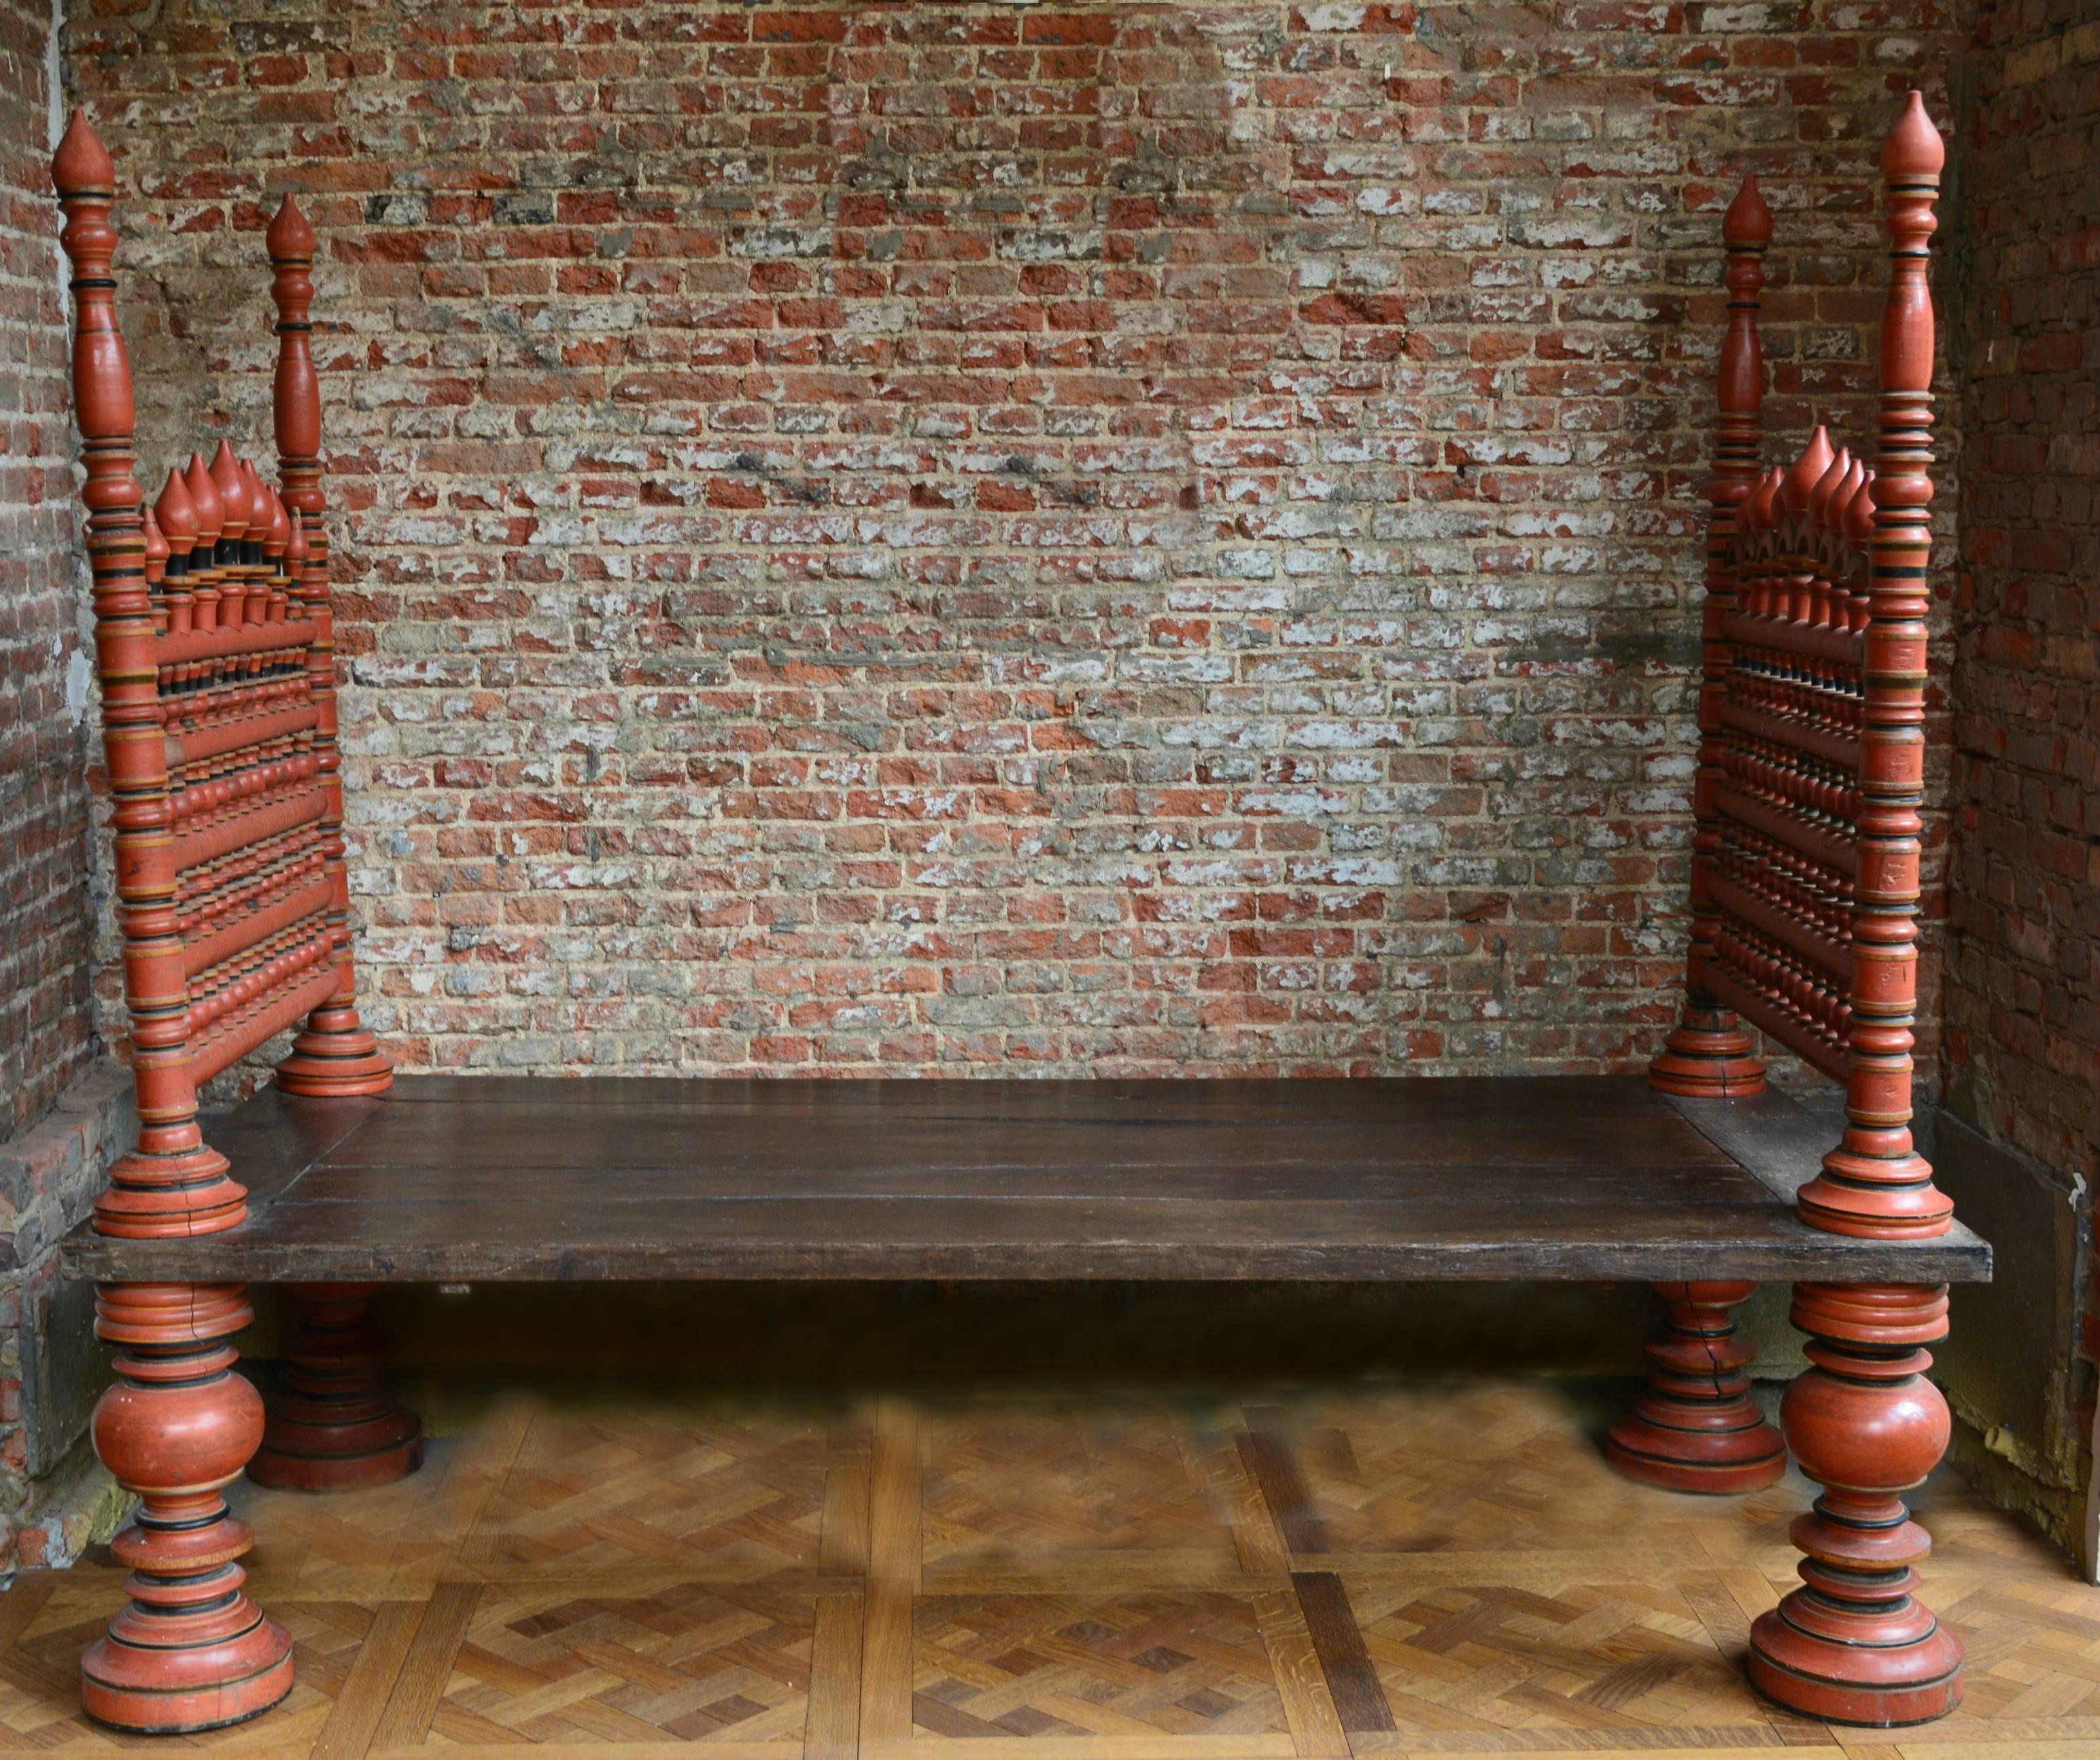 Beautiful 19th century Maharaja bed for lounging with removable sides. Completely original including the paint and the solid jack wood surface. The sculptural legs are each hand turned from a solid tree trunk!
There is a down filled velvet cushion